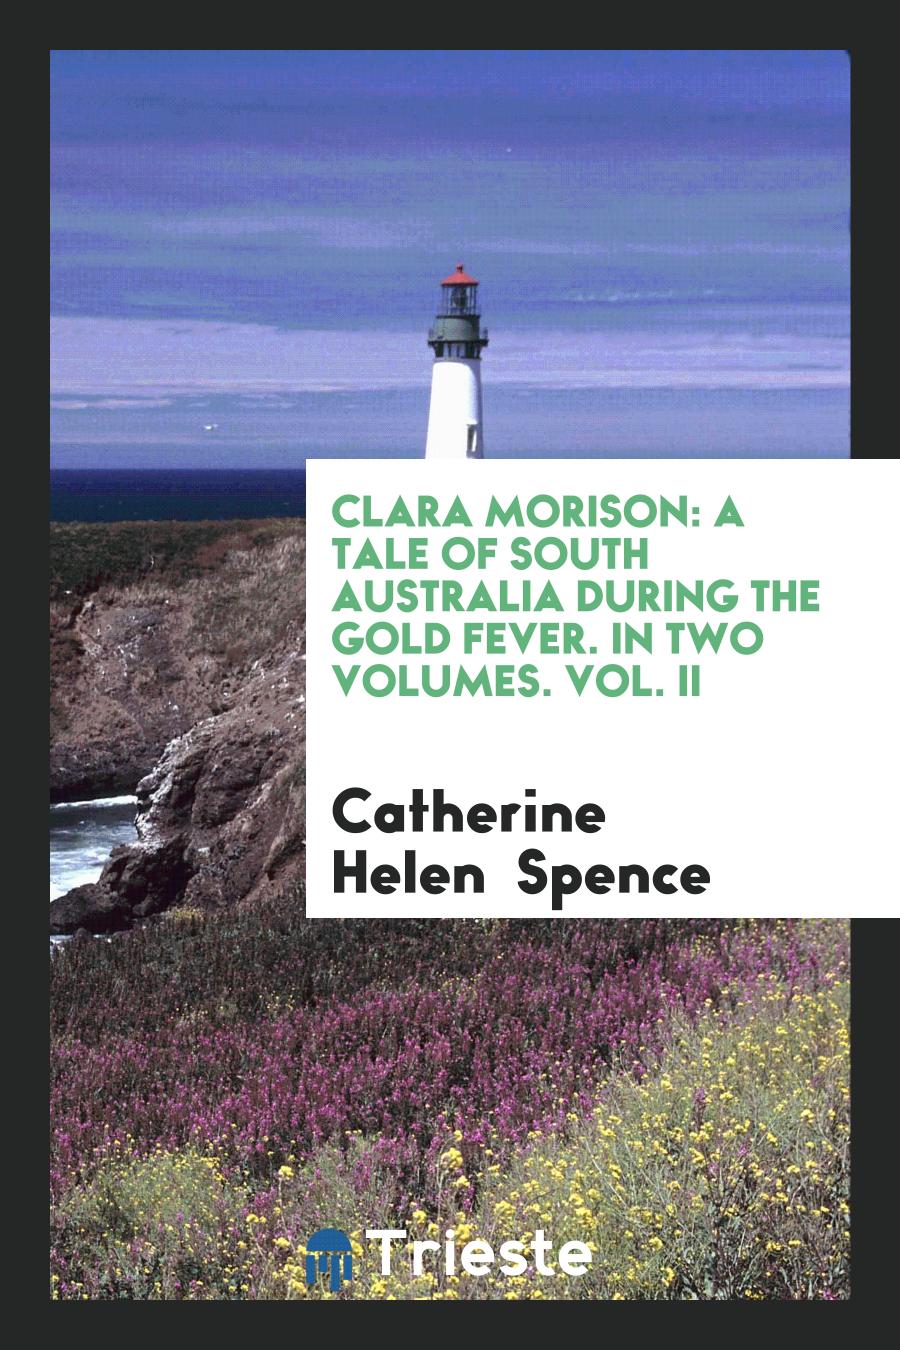 Clara Morison: A Tale of South Australia during the Gold Fever. In Two Volumes. Vol. II